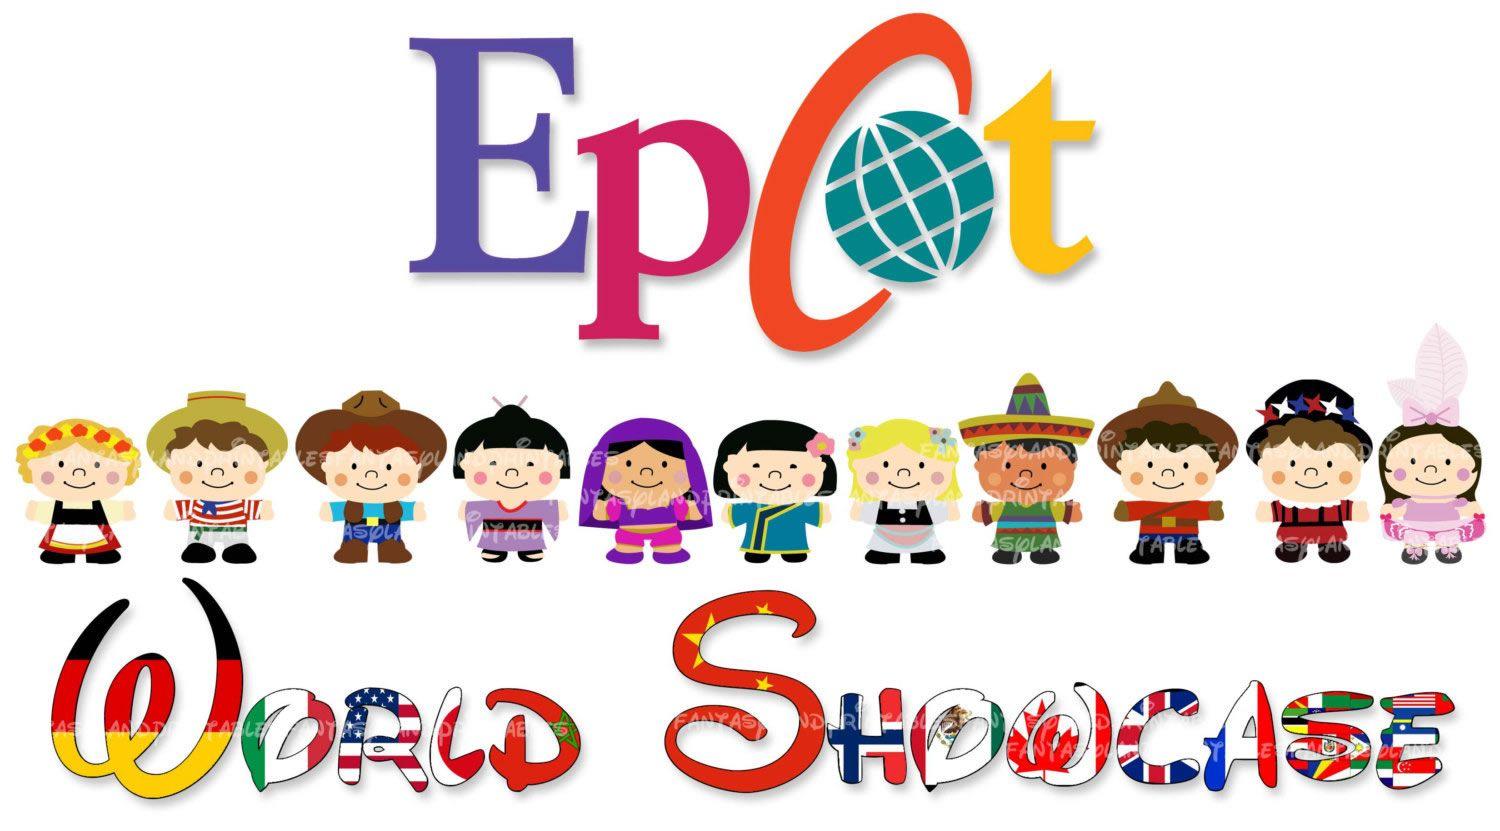 Walt Disney World Epcot Logo - Epcot Logo Png (image in Collection)